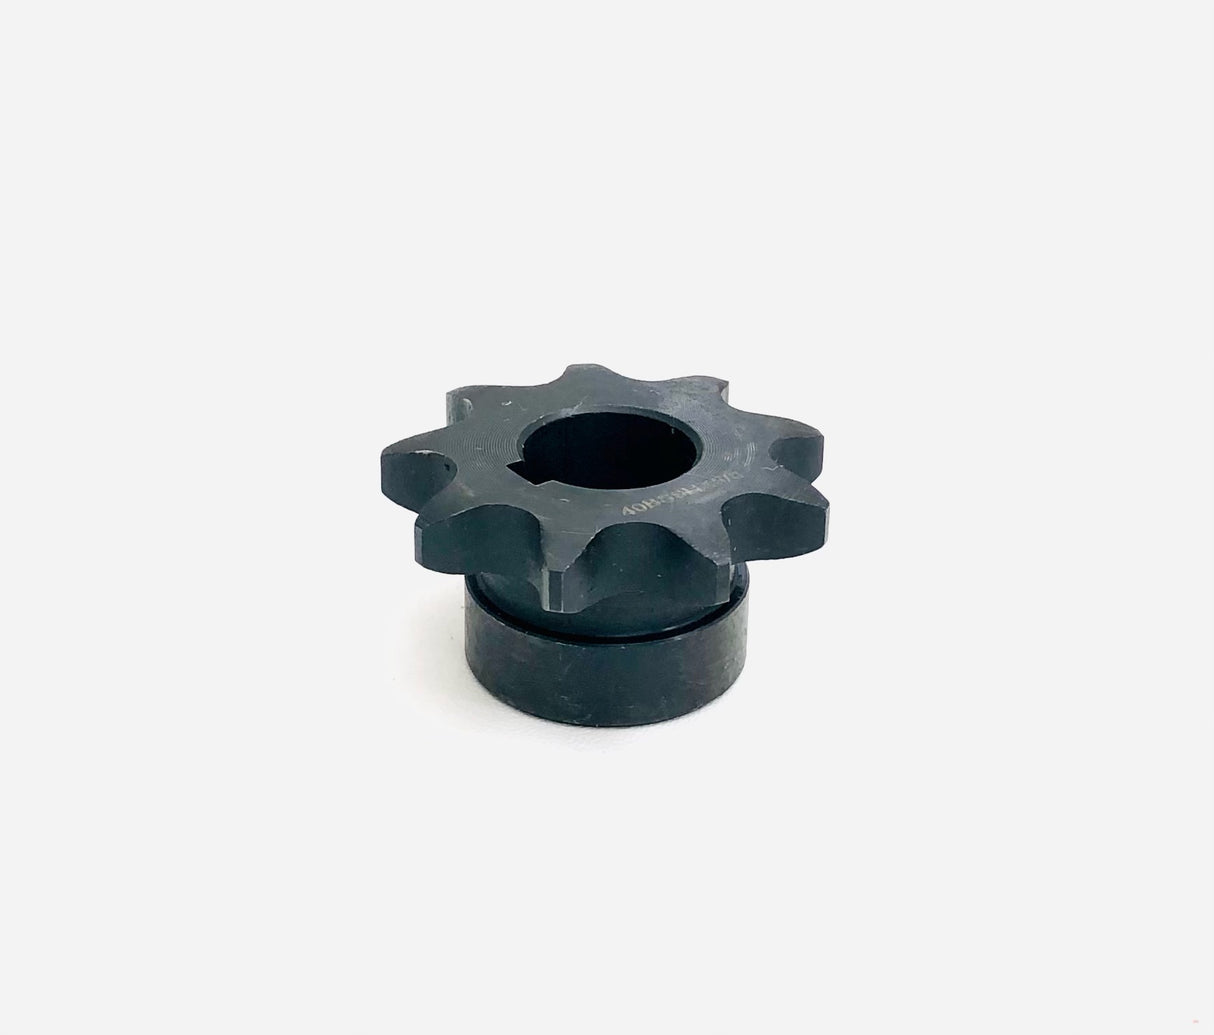 Middleby 22152-0017 - Conveyor Drive Sprocket - 9 Tooth